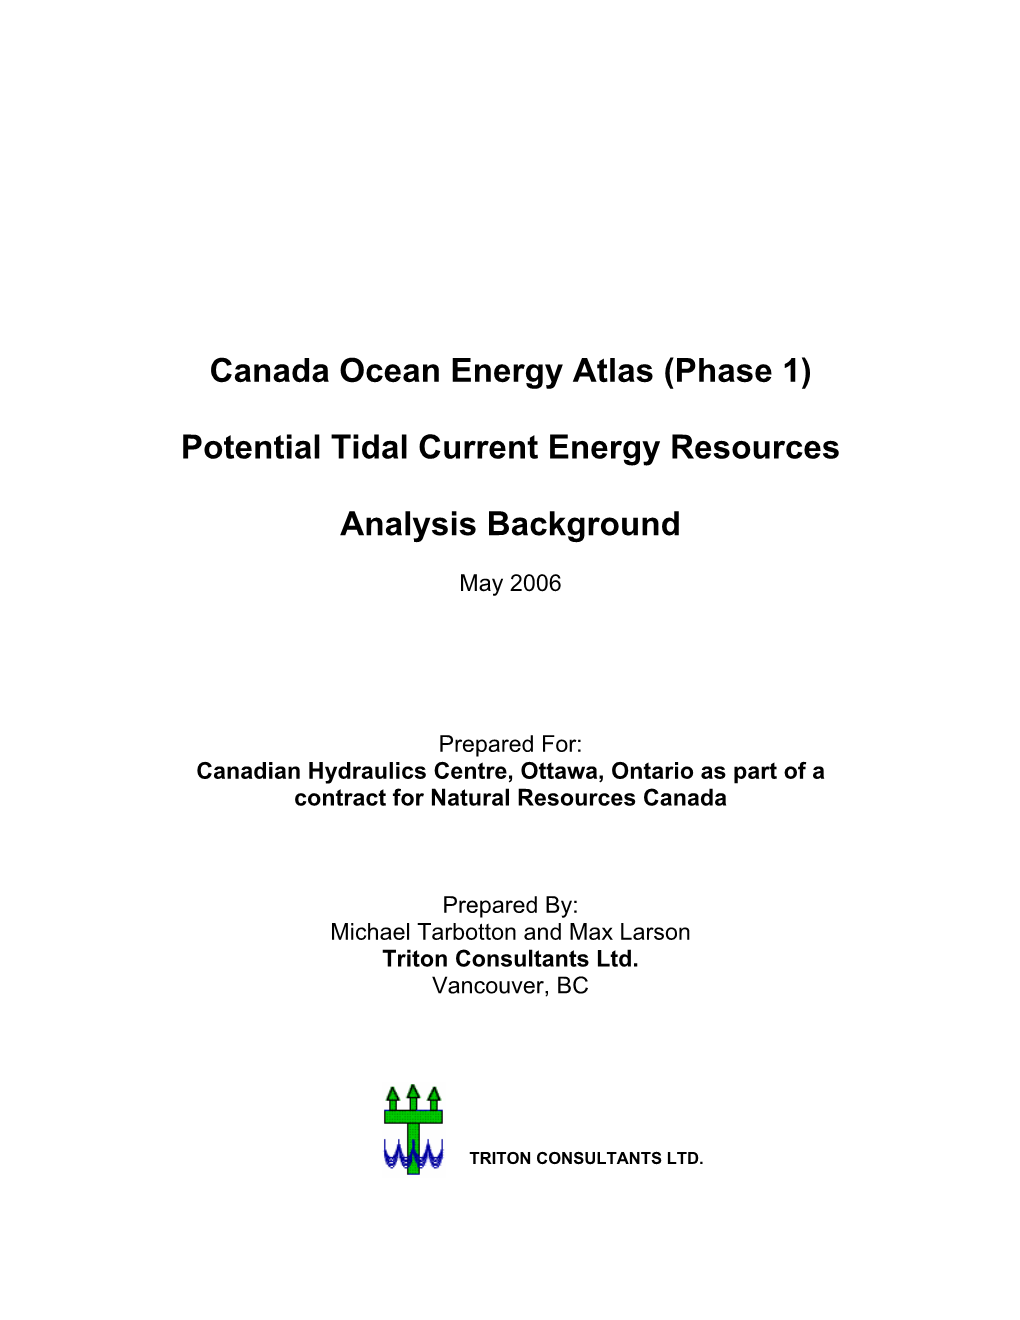 Potential Tidal Current Energy Resources Analysis Background